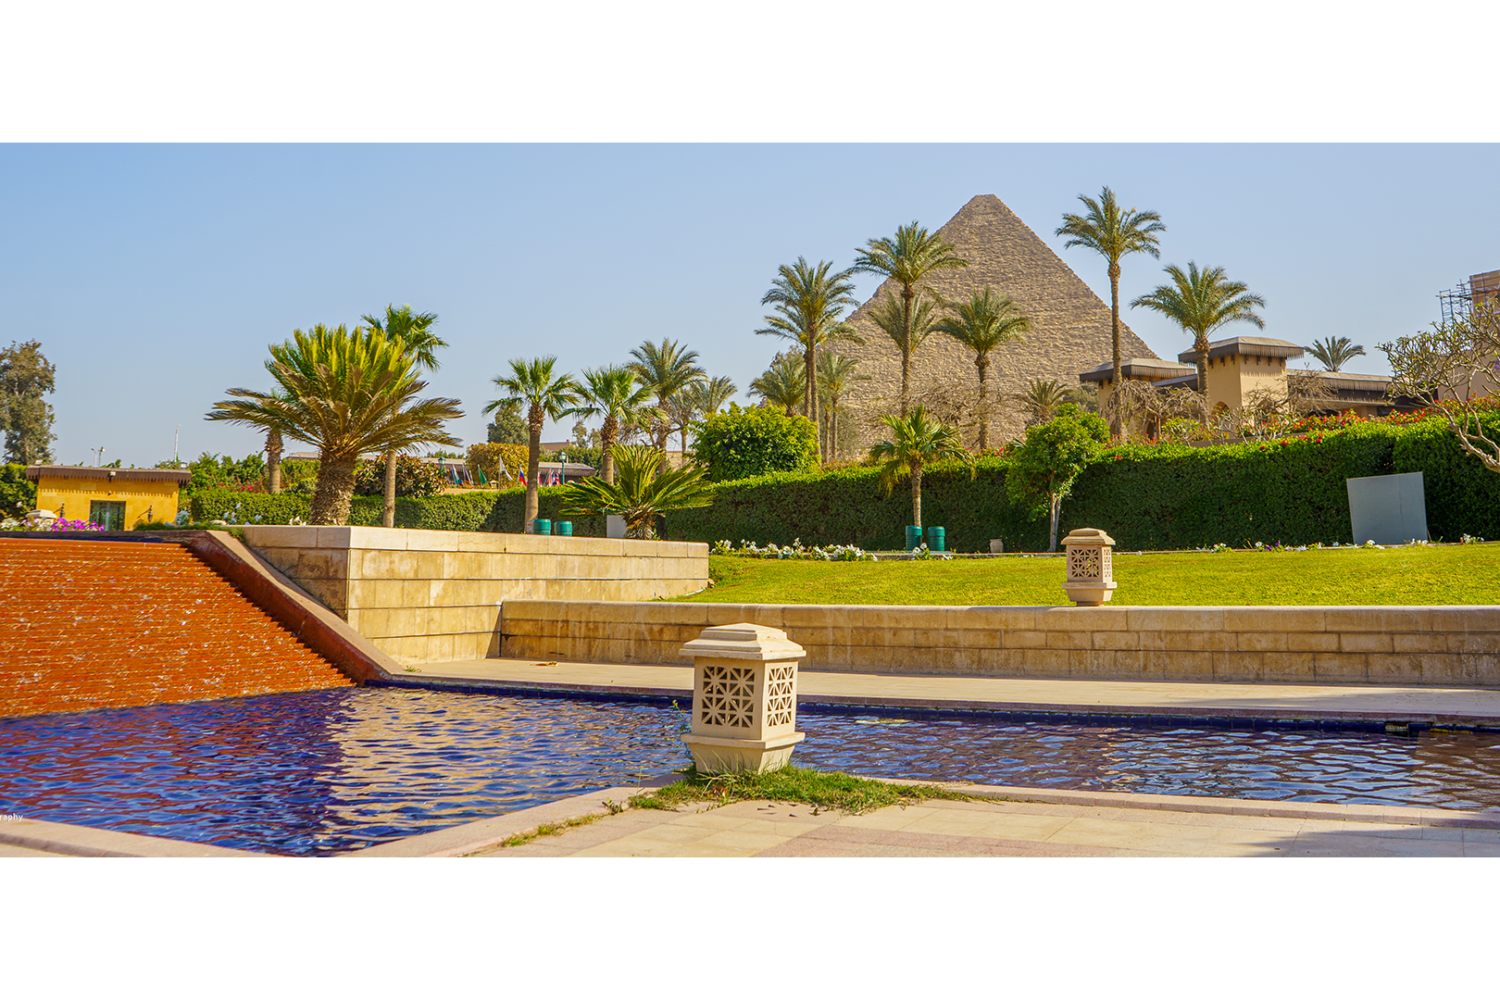 Marriott Mena House Hotel - Cairo | Egypt in the Golden Age of Travel Luxury Tour